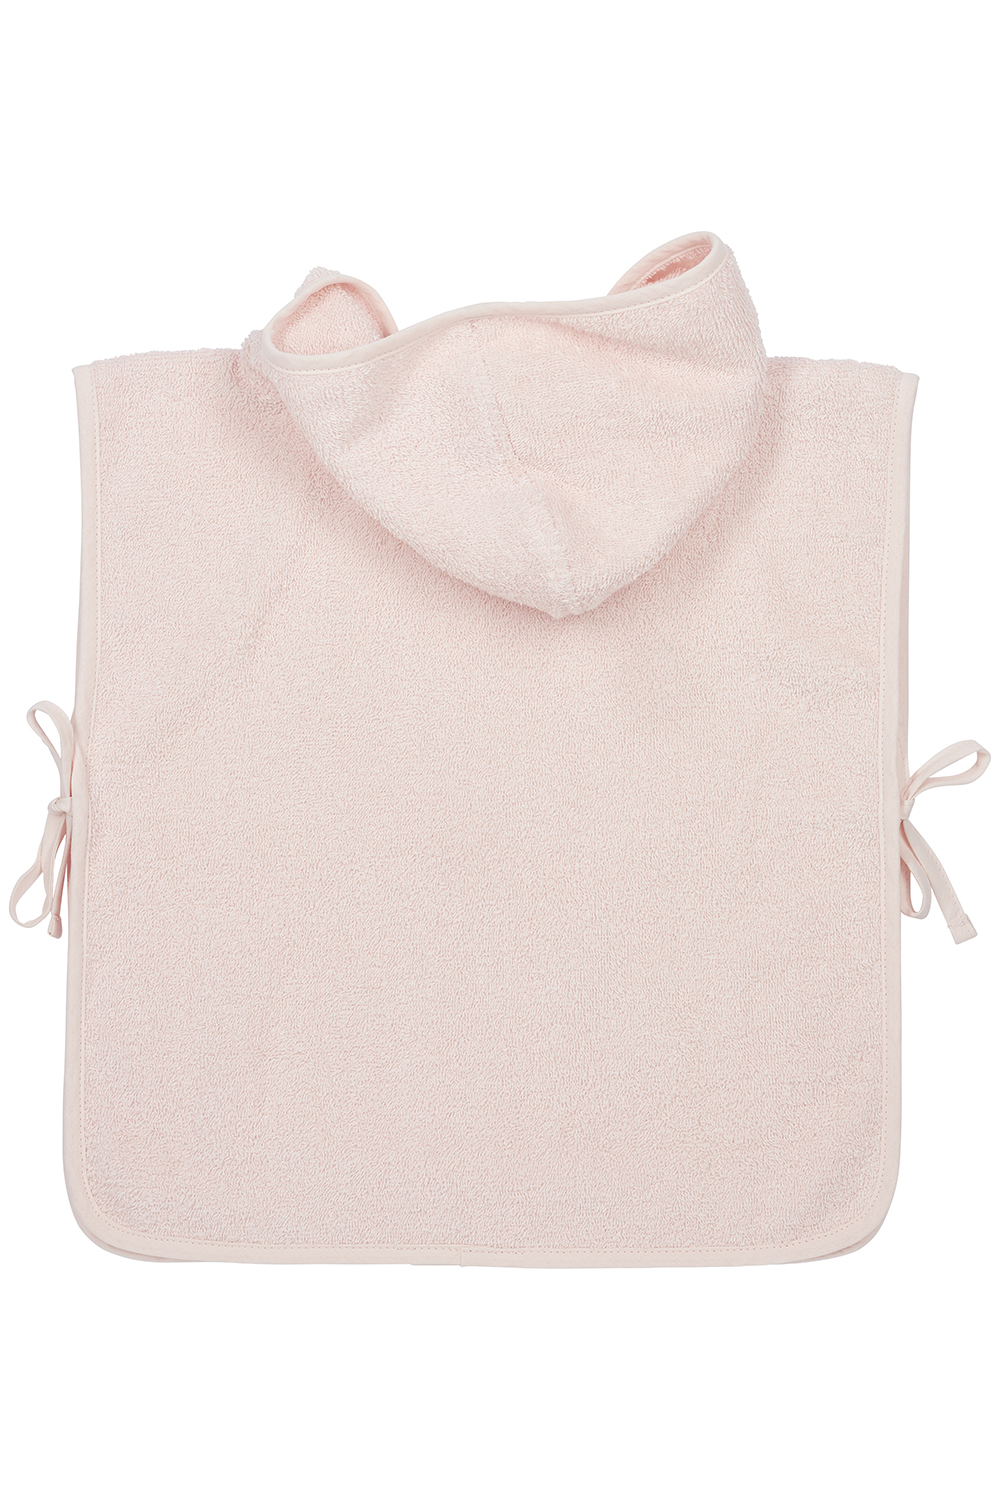 Badeponcho frottee Uni - soft pink - 1-3 Jahre